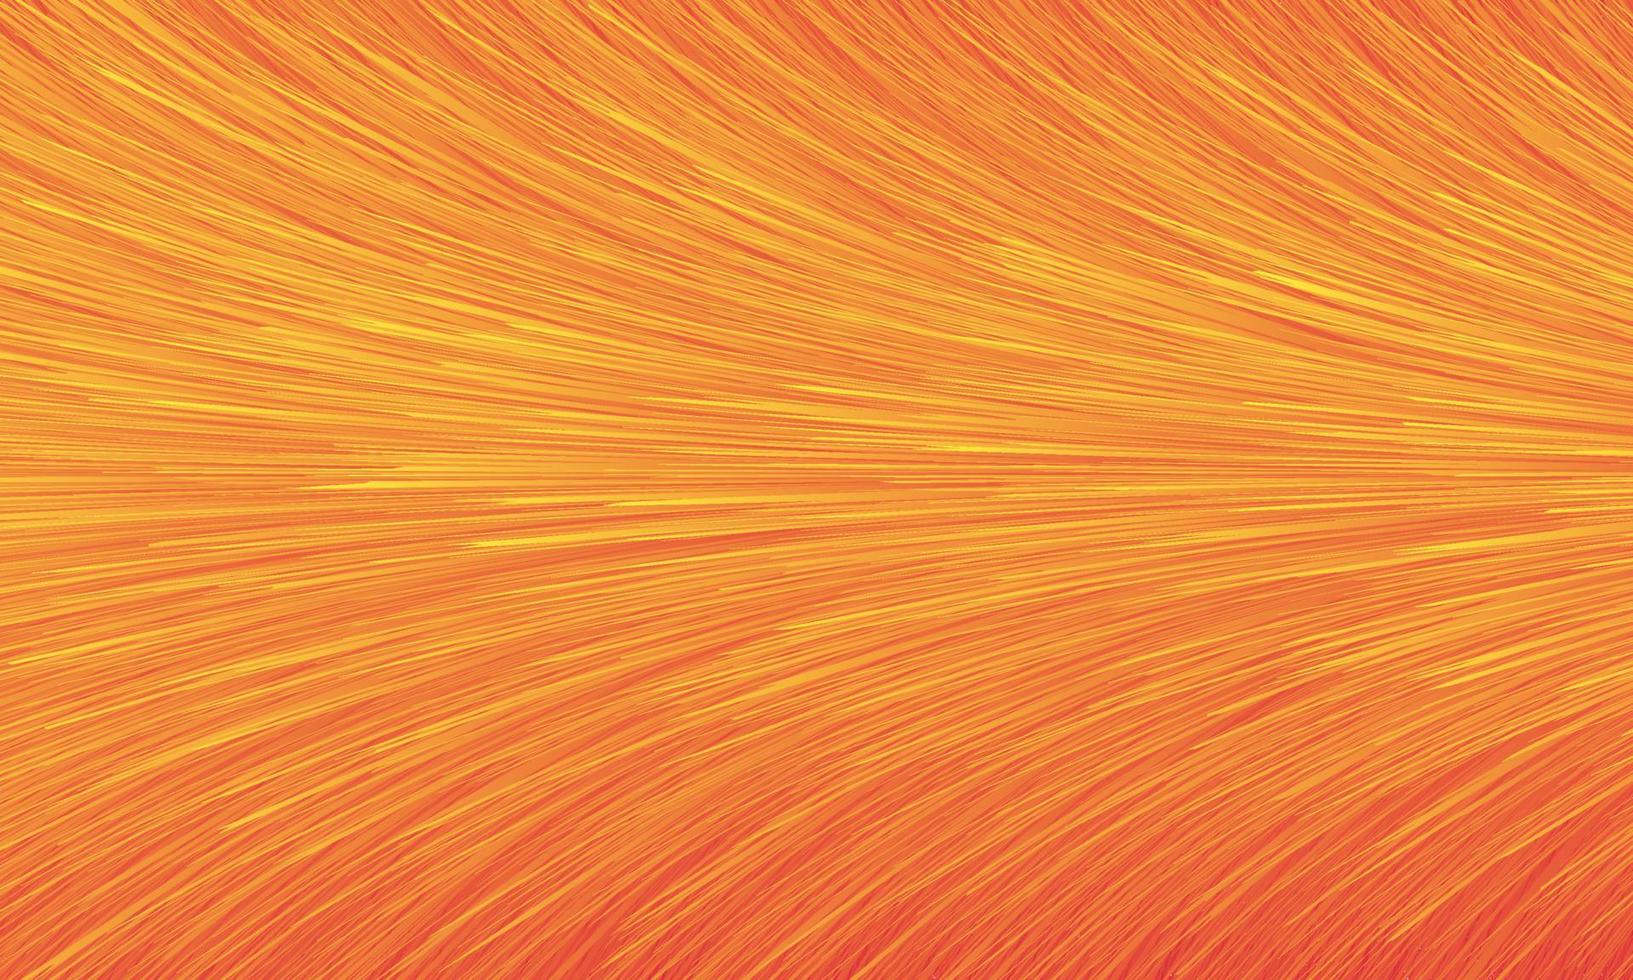 Orange and yellow abstract background with light rays texture lines in motion vector